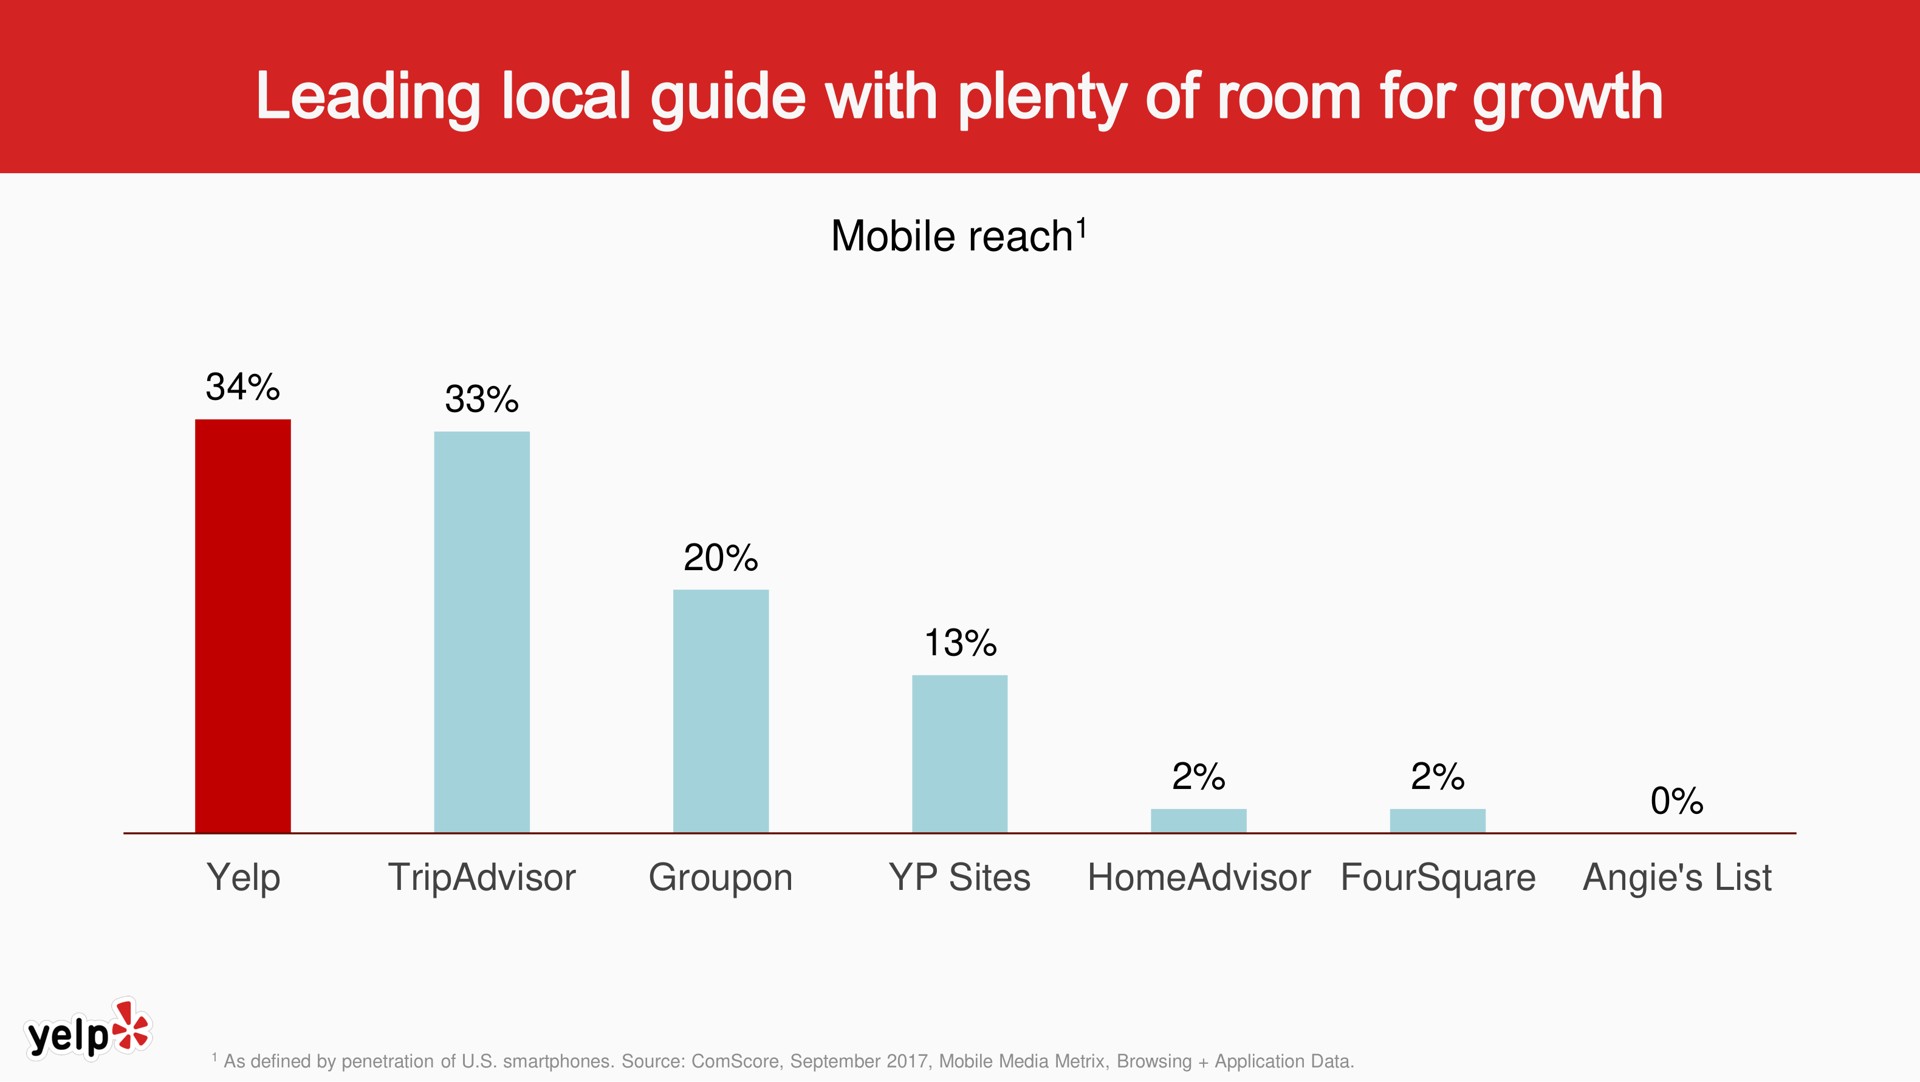 mobile reach yelp sites foursquare list leading local guide with plenty of room for growth | Yelp